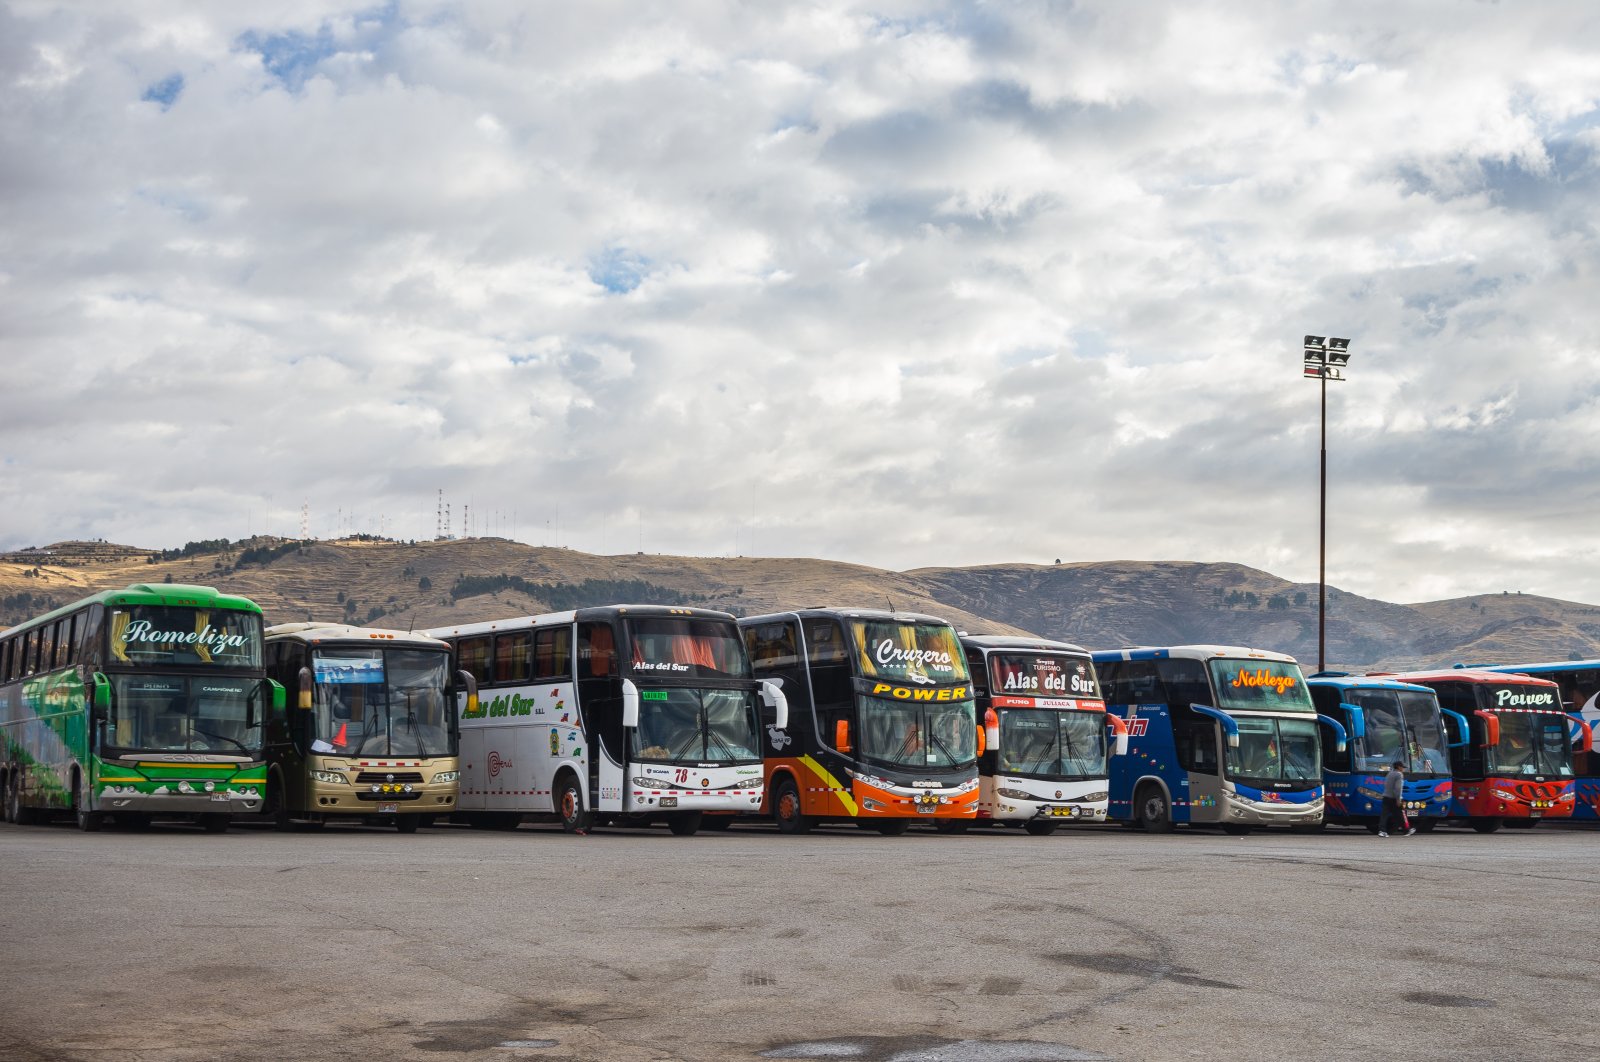 A row of buses parked at Arequipa bus station, Arequipa, Peru, Aug. 18, 2015. (ShutterStock Photo)